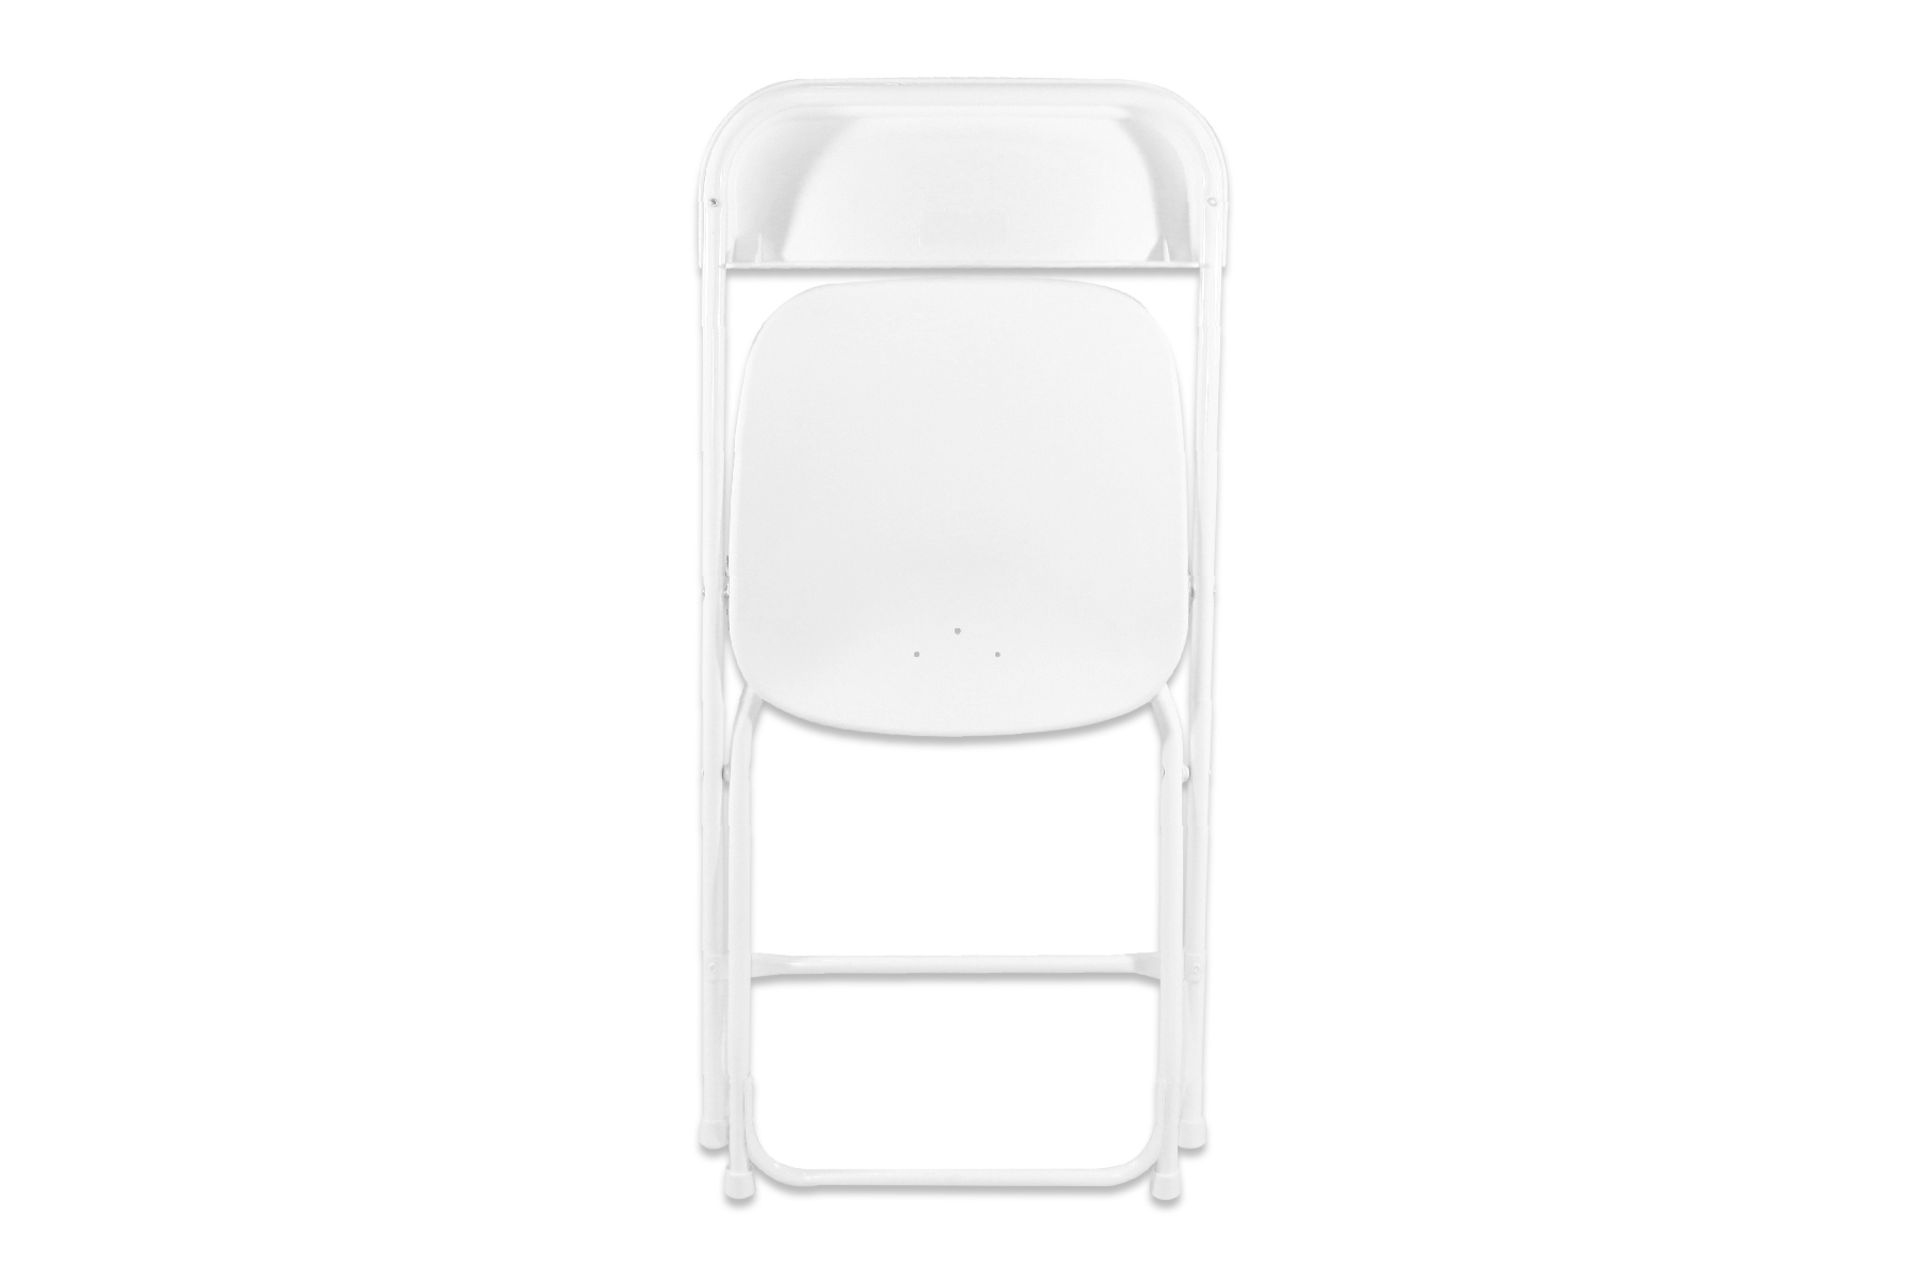 V *TRADE QTY* Grade A Folding Plastic Chair - White X180 YOUR BID PRICE TO BE MULTIPLIED BY ONE - Image 3 of 6